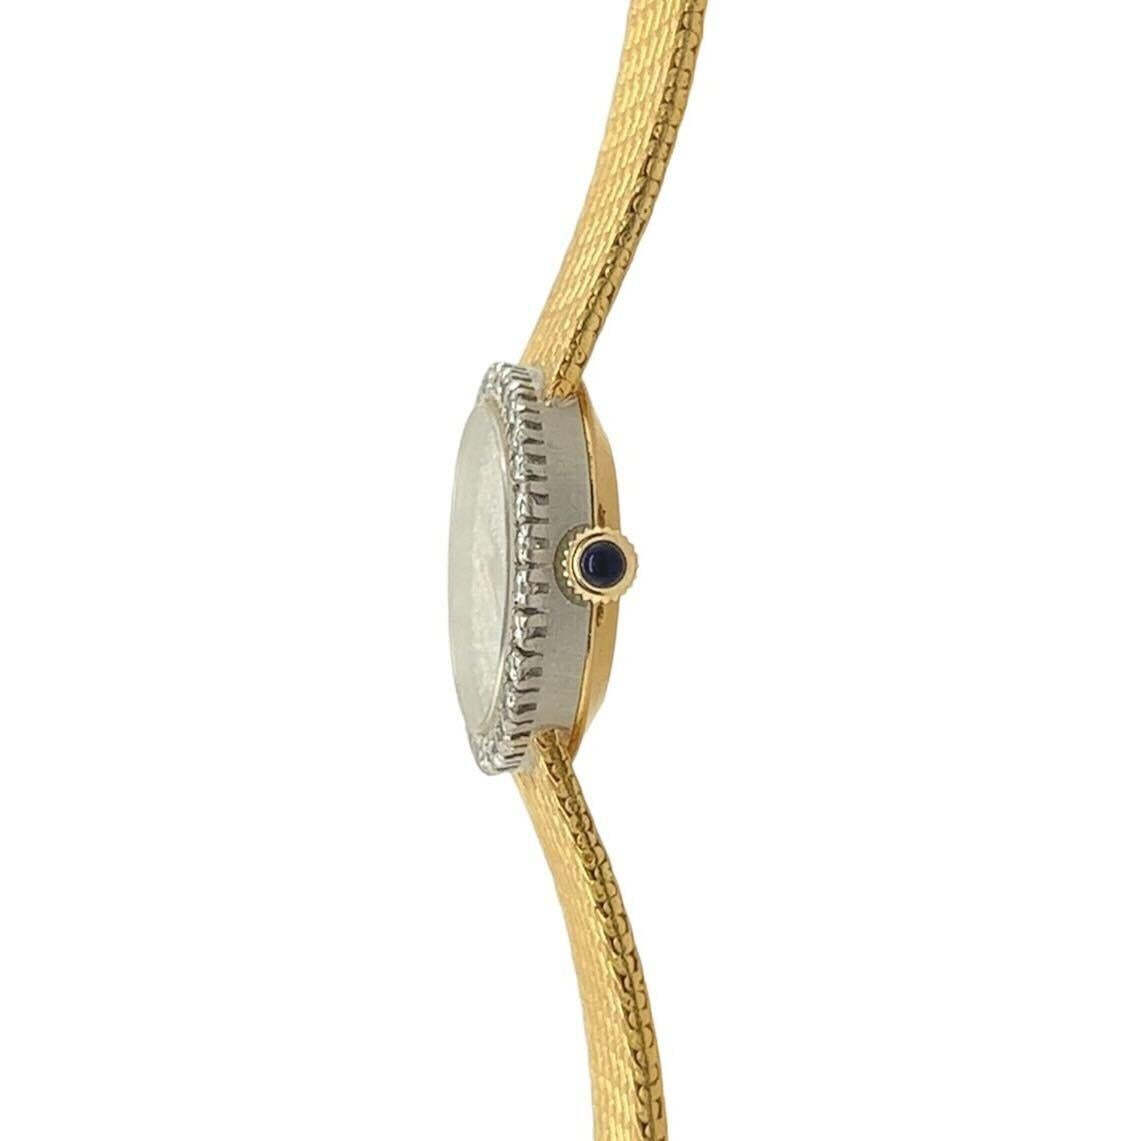 An 18 karat yellow gold, platinum and diamond watch, Baume & Mercier.  The manual movement watch designed as a horizontal oval dial of platinum pave set with approximately seventy five (75) round brilliant cut diamonds completed by gold hands within